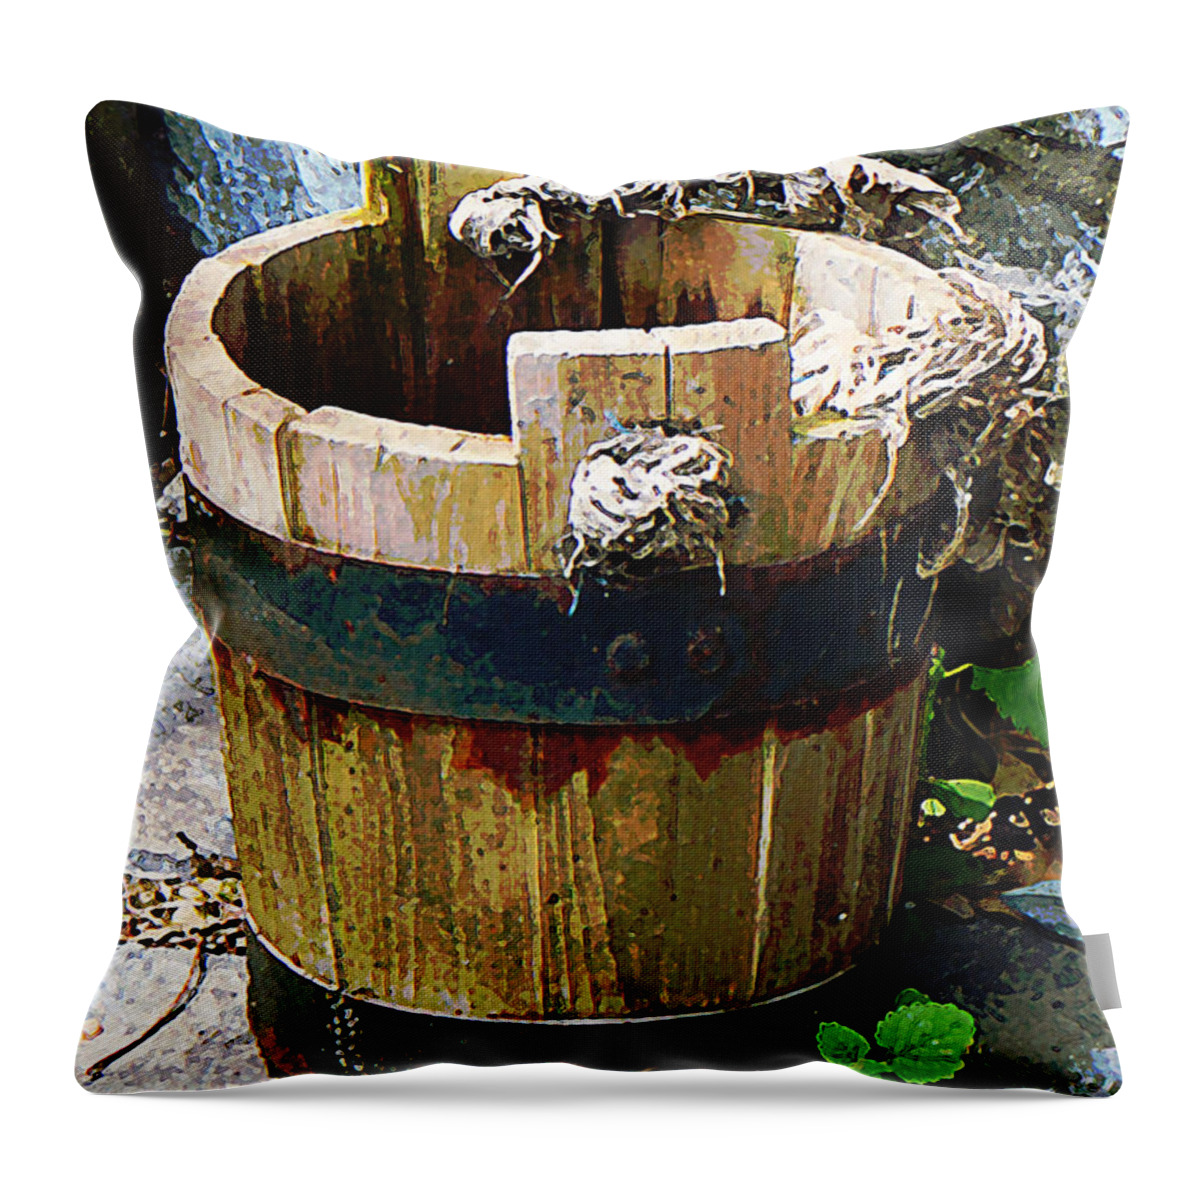 Bucket Throw Pillow featuring the photograph Bucket by Susan Savad